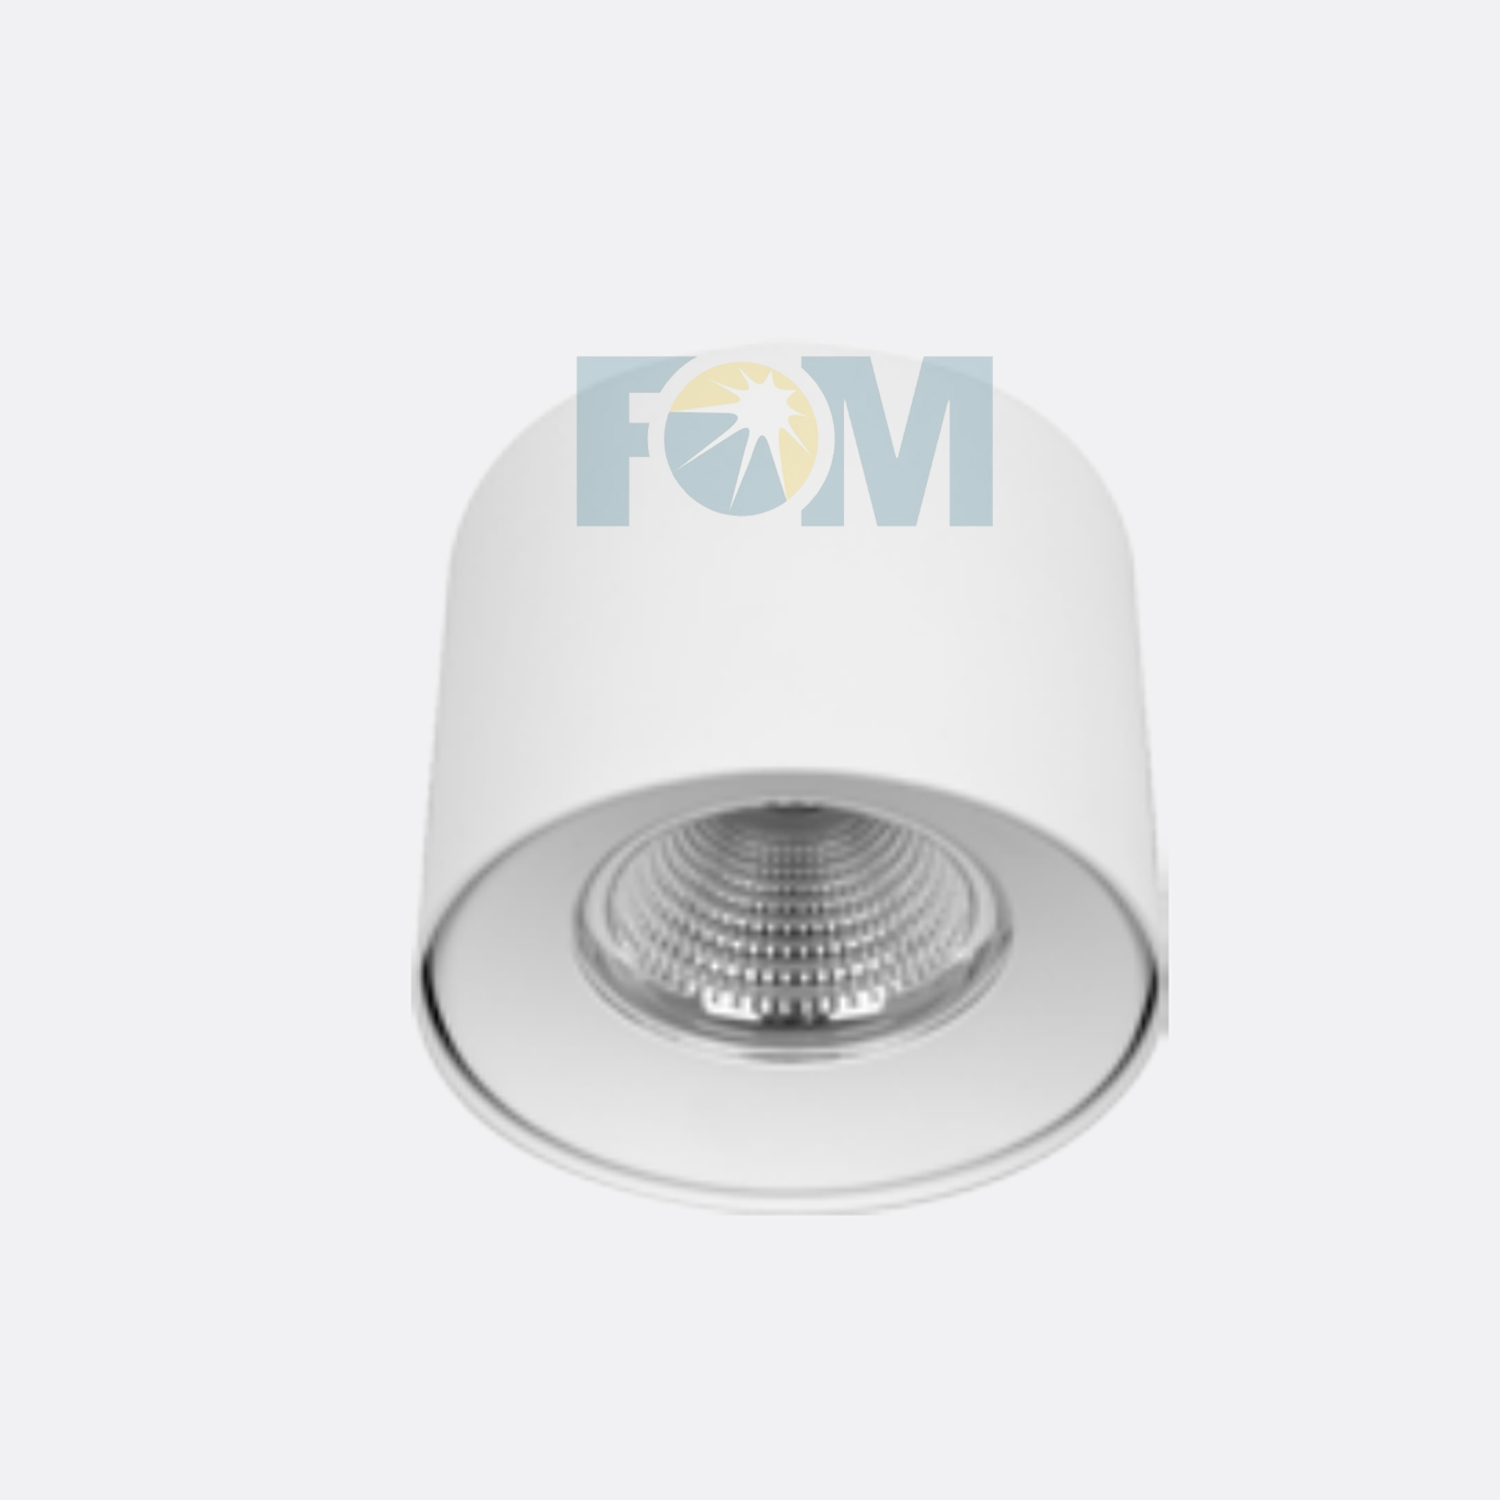 Surface Mounted Downlight Down lights are more decorative than other lamps